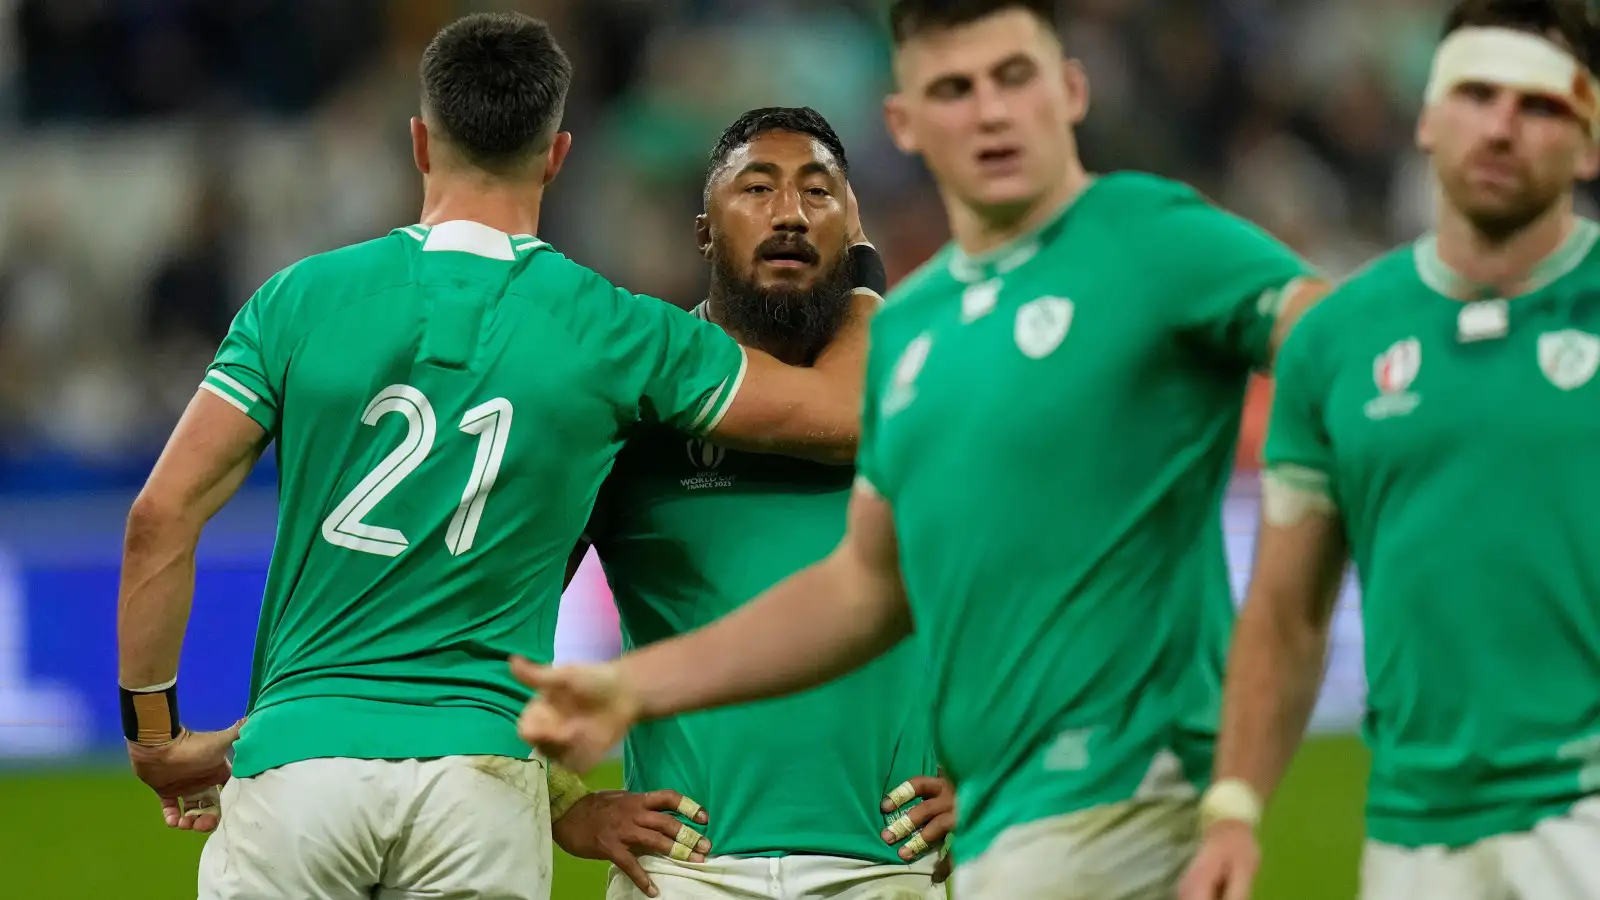 Bundee Aki and Ireland team-mates dejected after losing Rugby World Cup quarter-final to New Zealand.